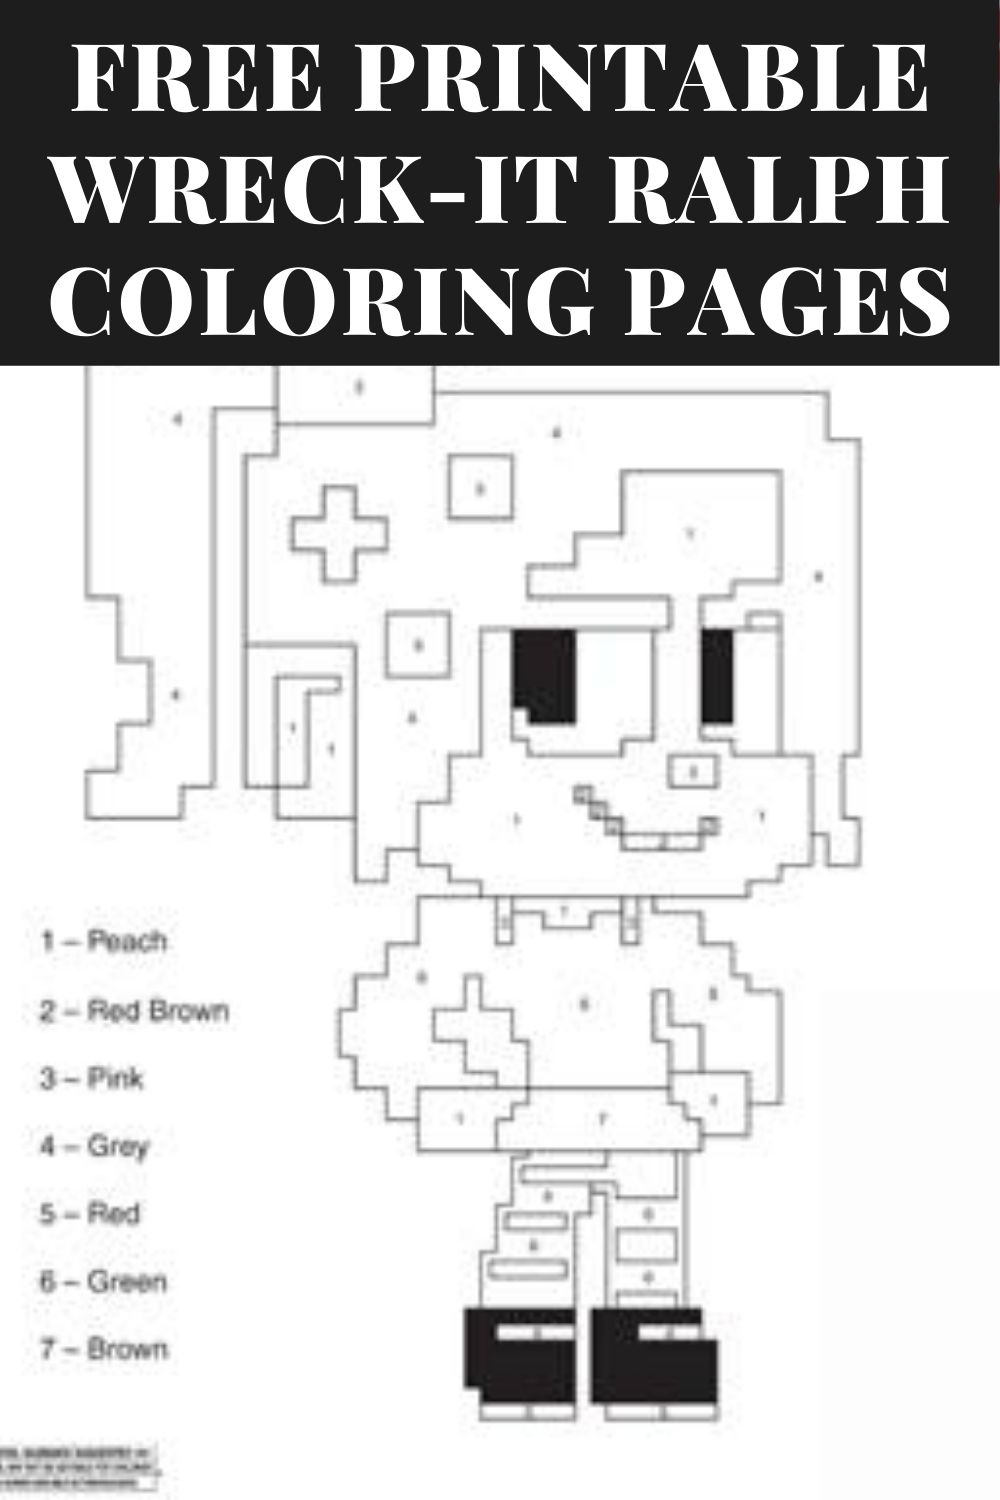 Wreck-It Ralph Coloring Pages (Free Printables)